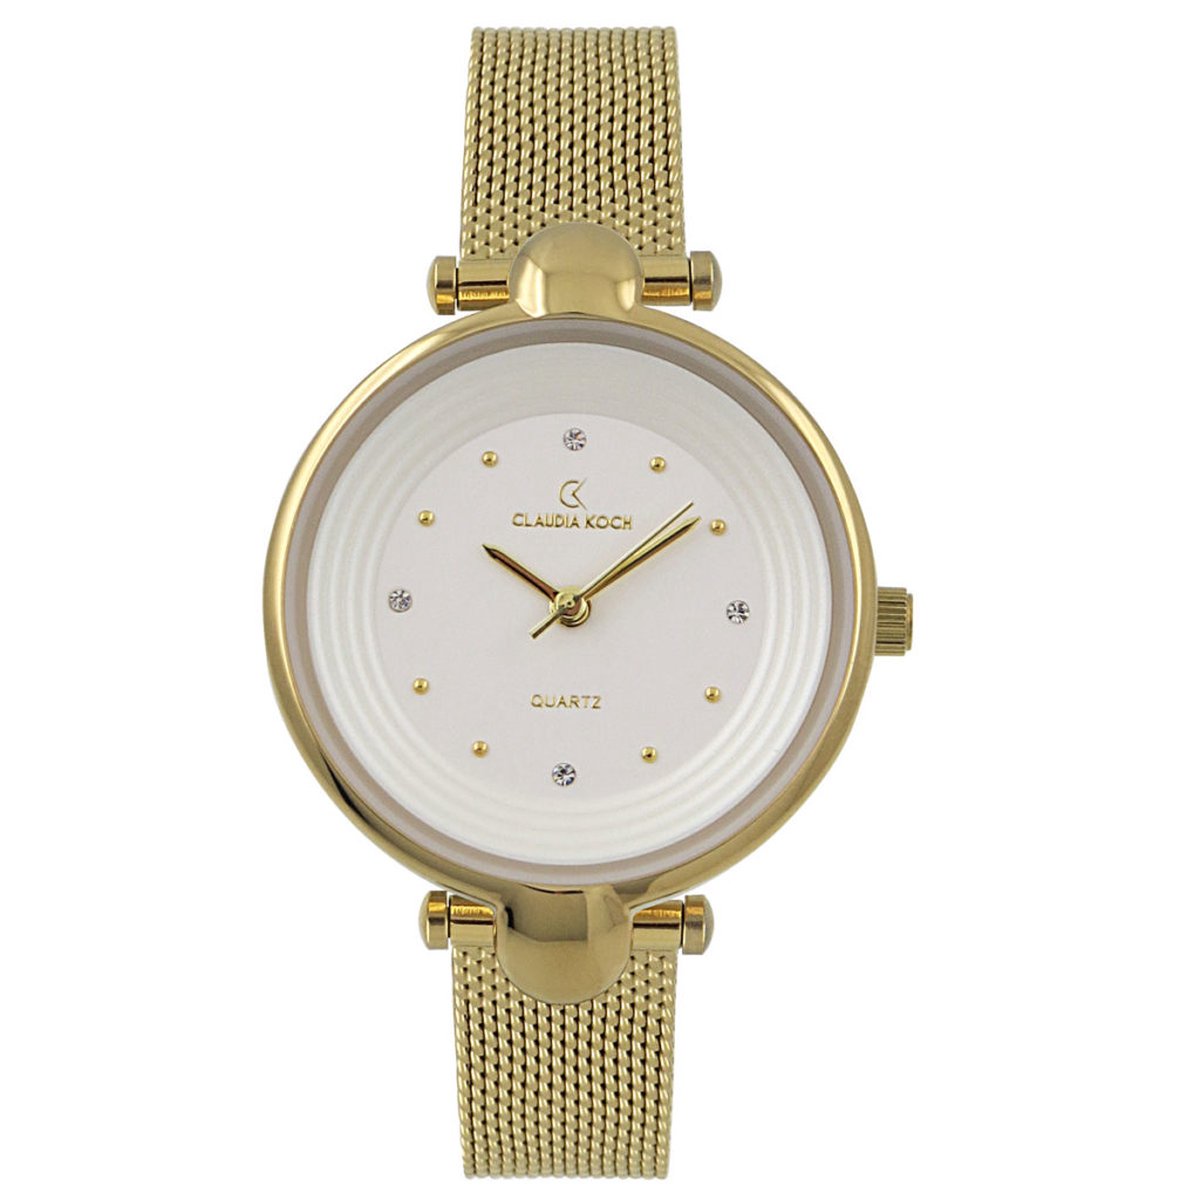 Claudia Koch CK 2955 Women Gold with White